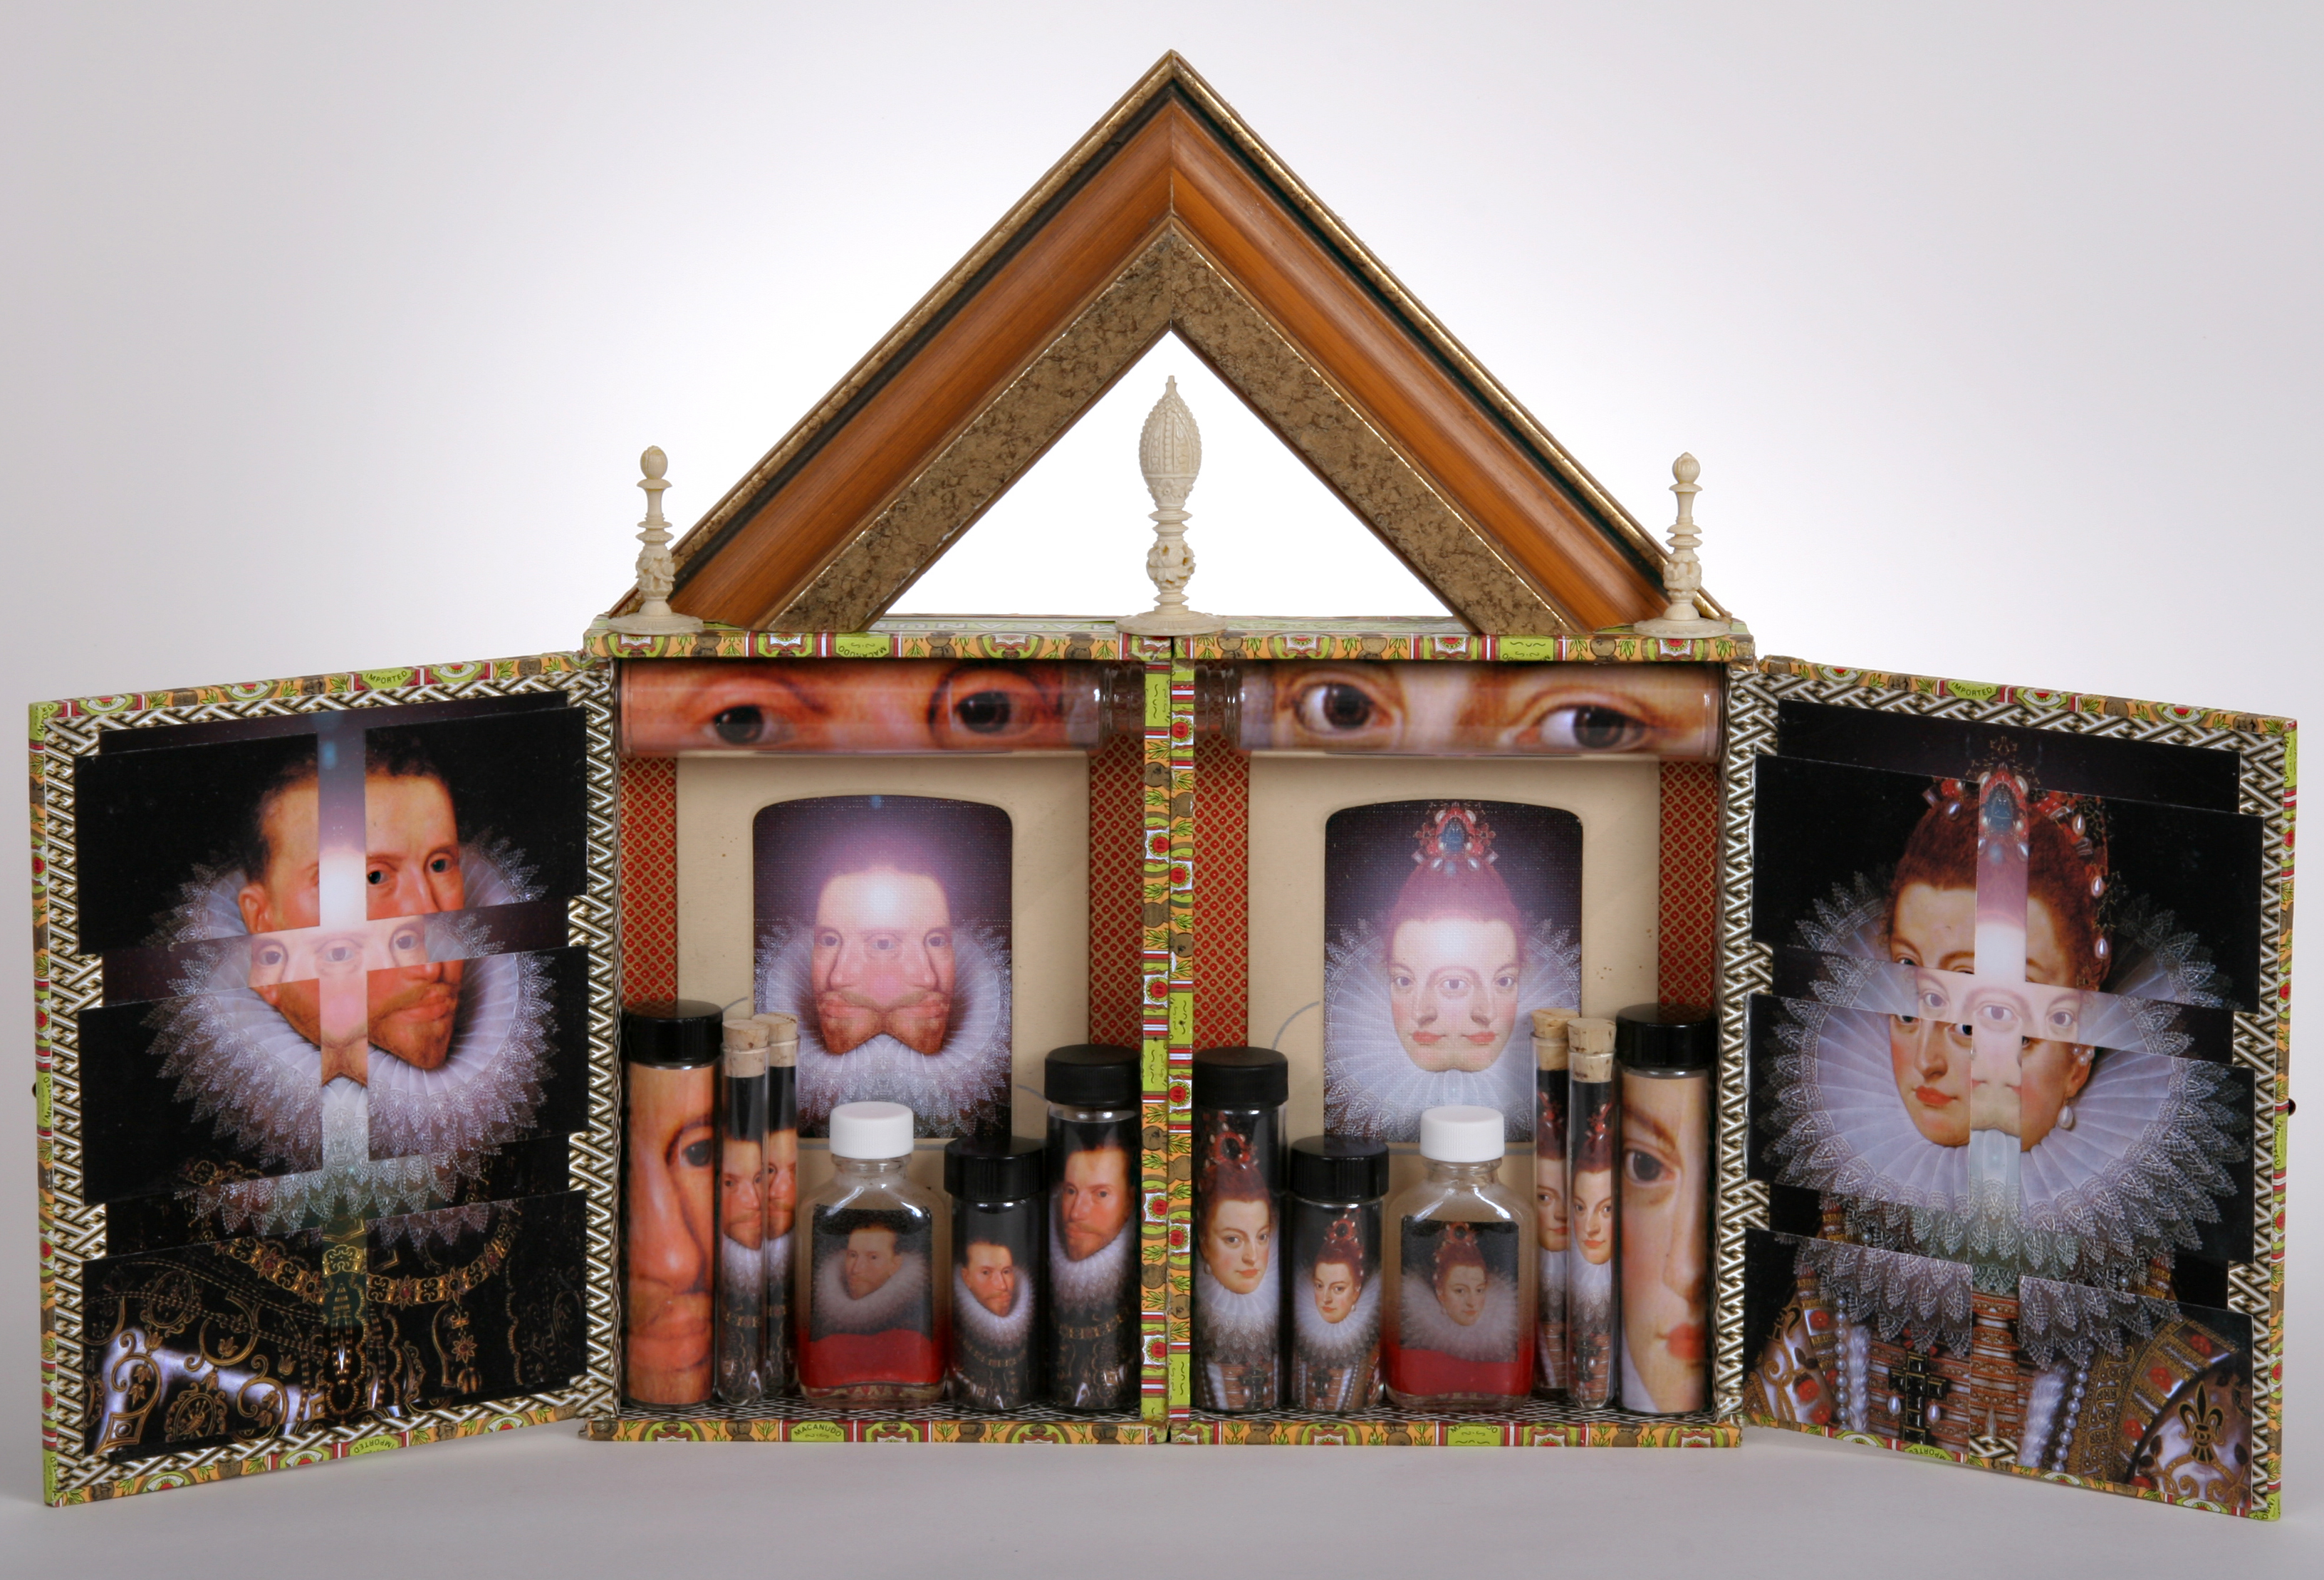     \"Purification Of Consciousness\"
mixed-media assemblage
    24.5\" x 15\" x 2\"
    2008
    SOLD